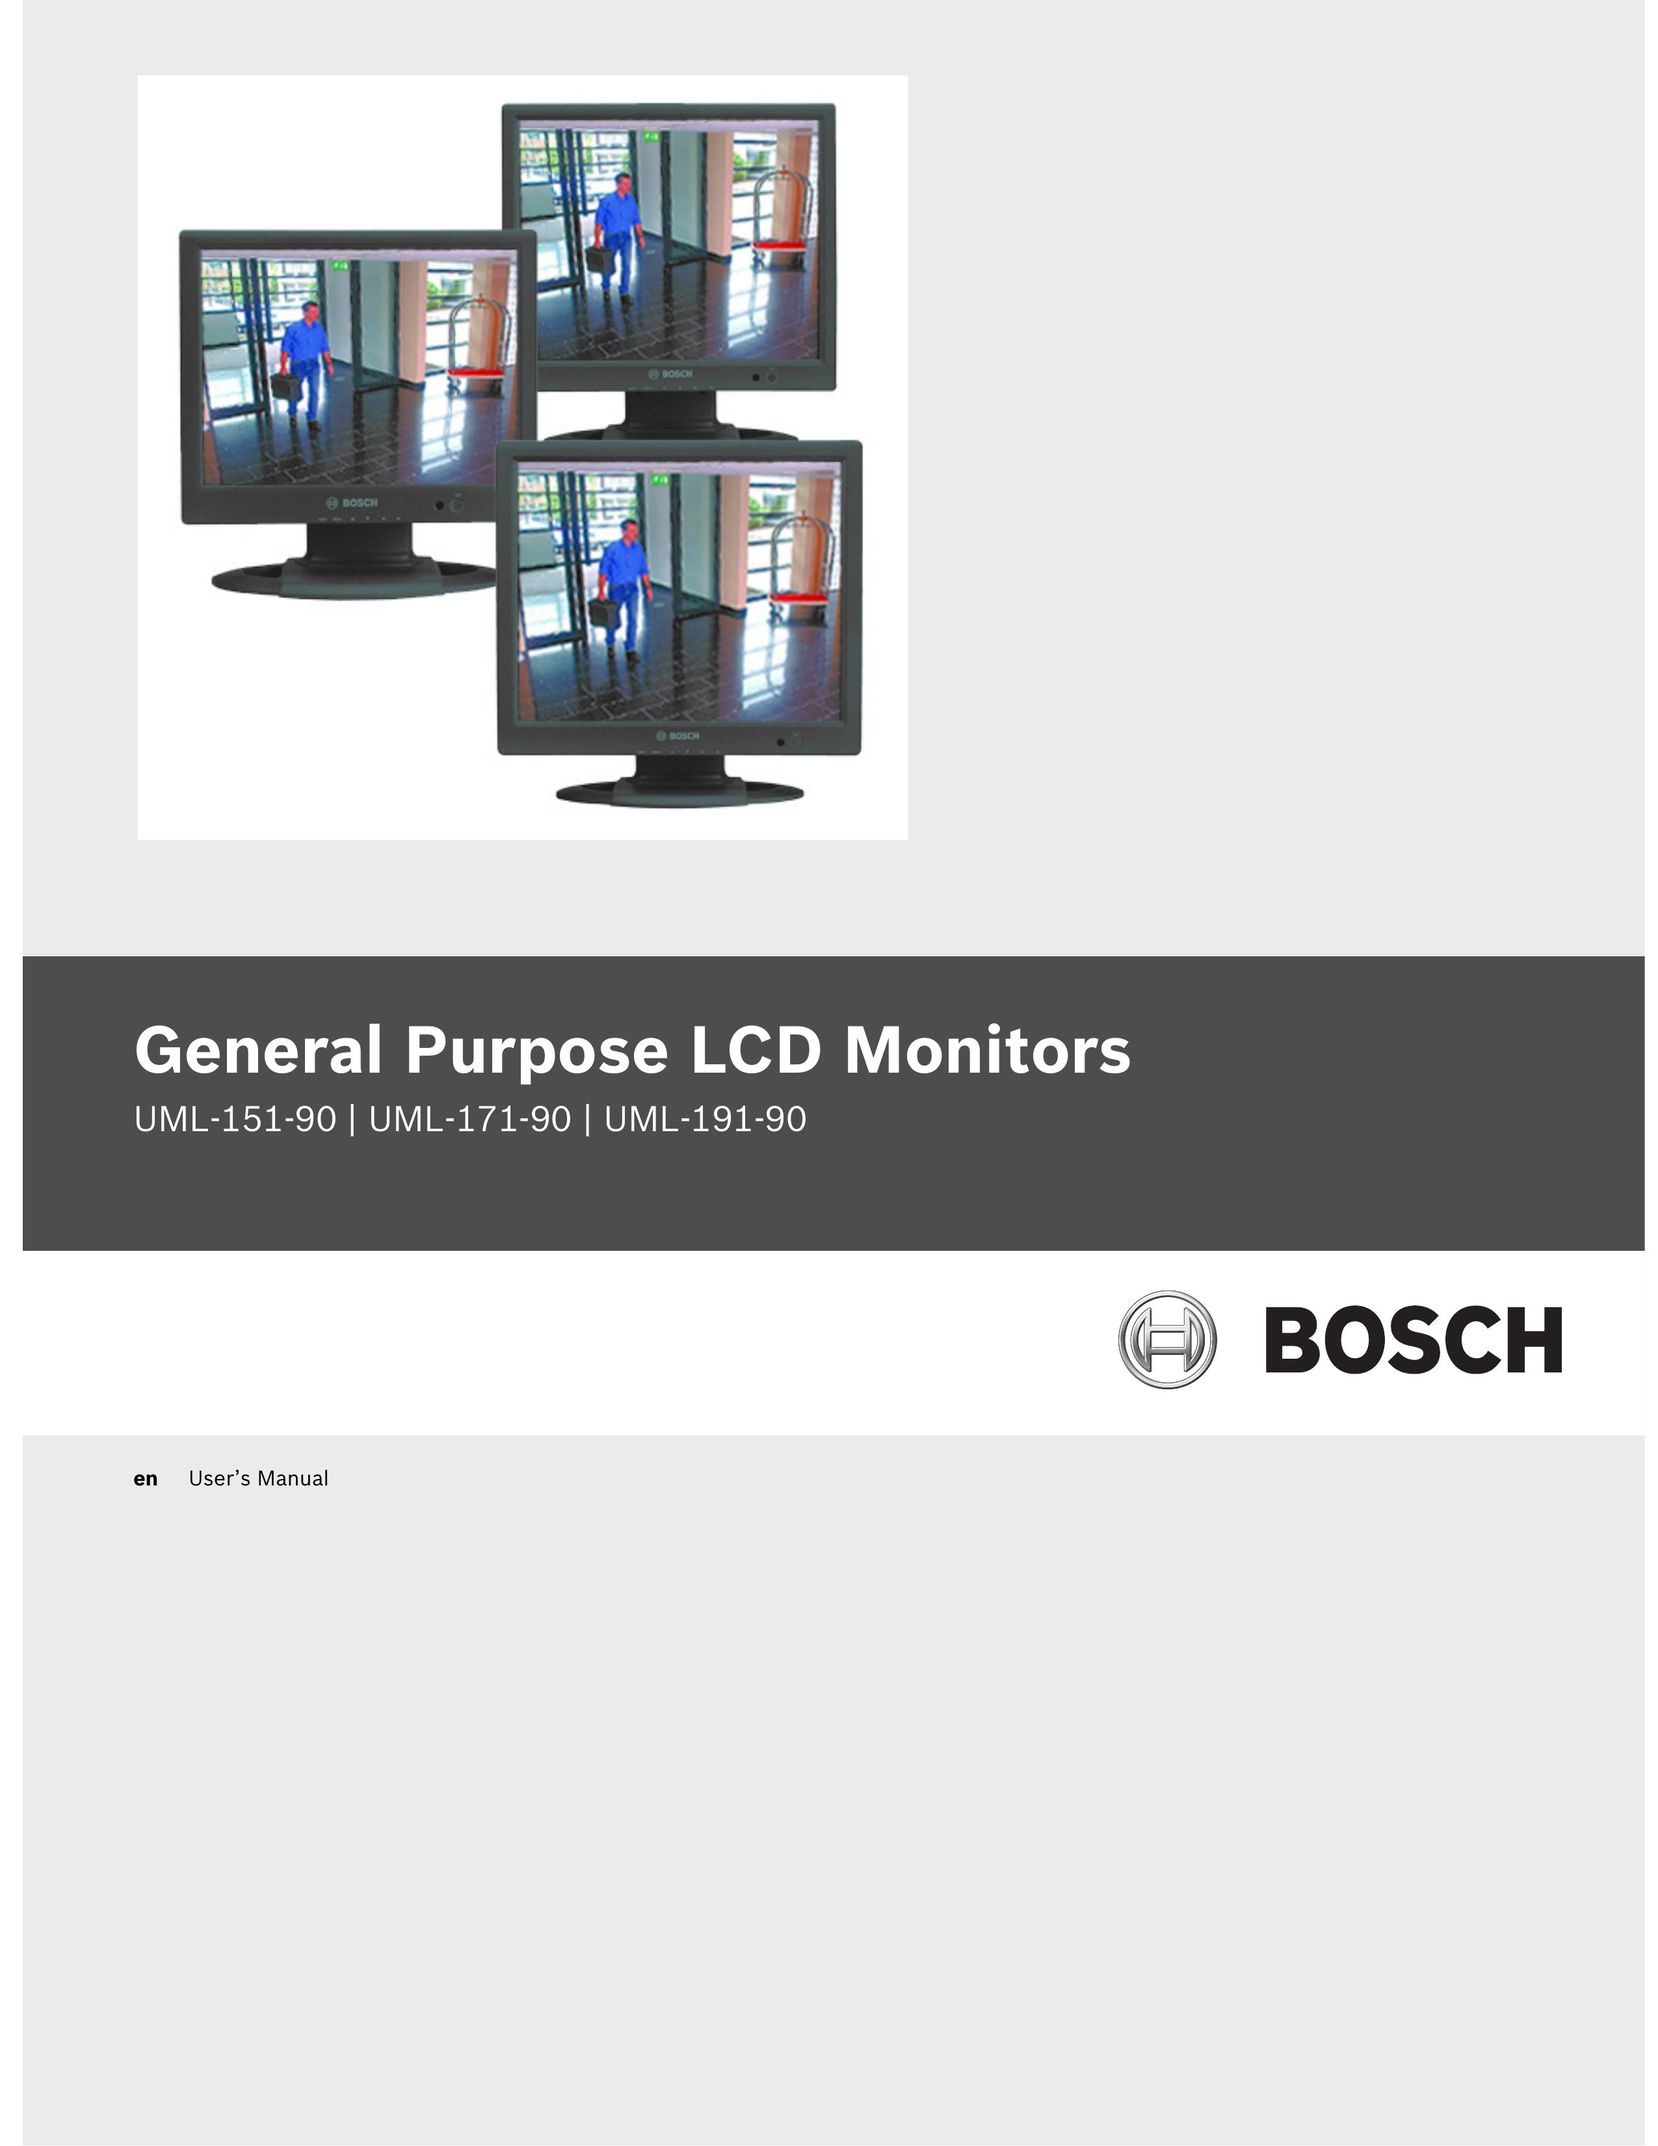 Bosch Appliances UML-151-90 Computer Monitor User Manual (Page 1)